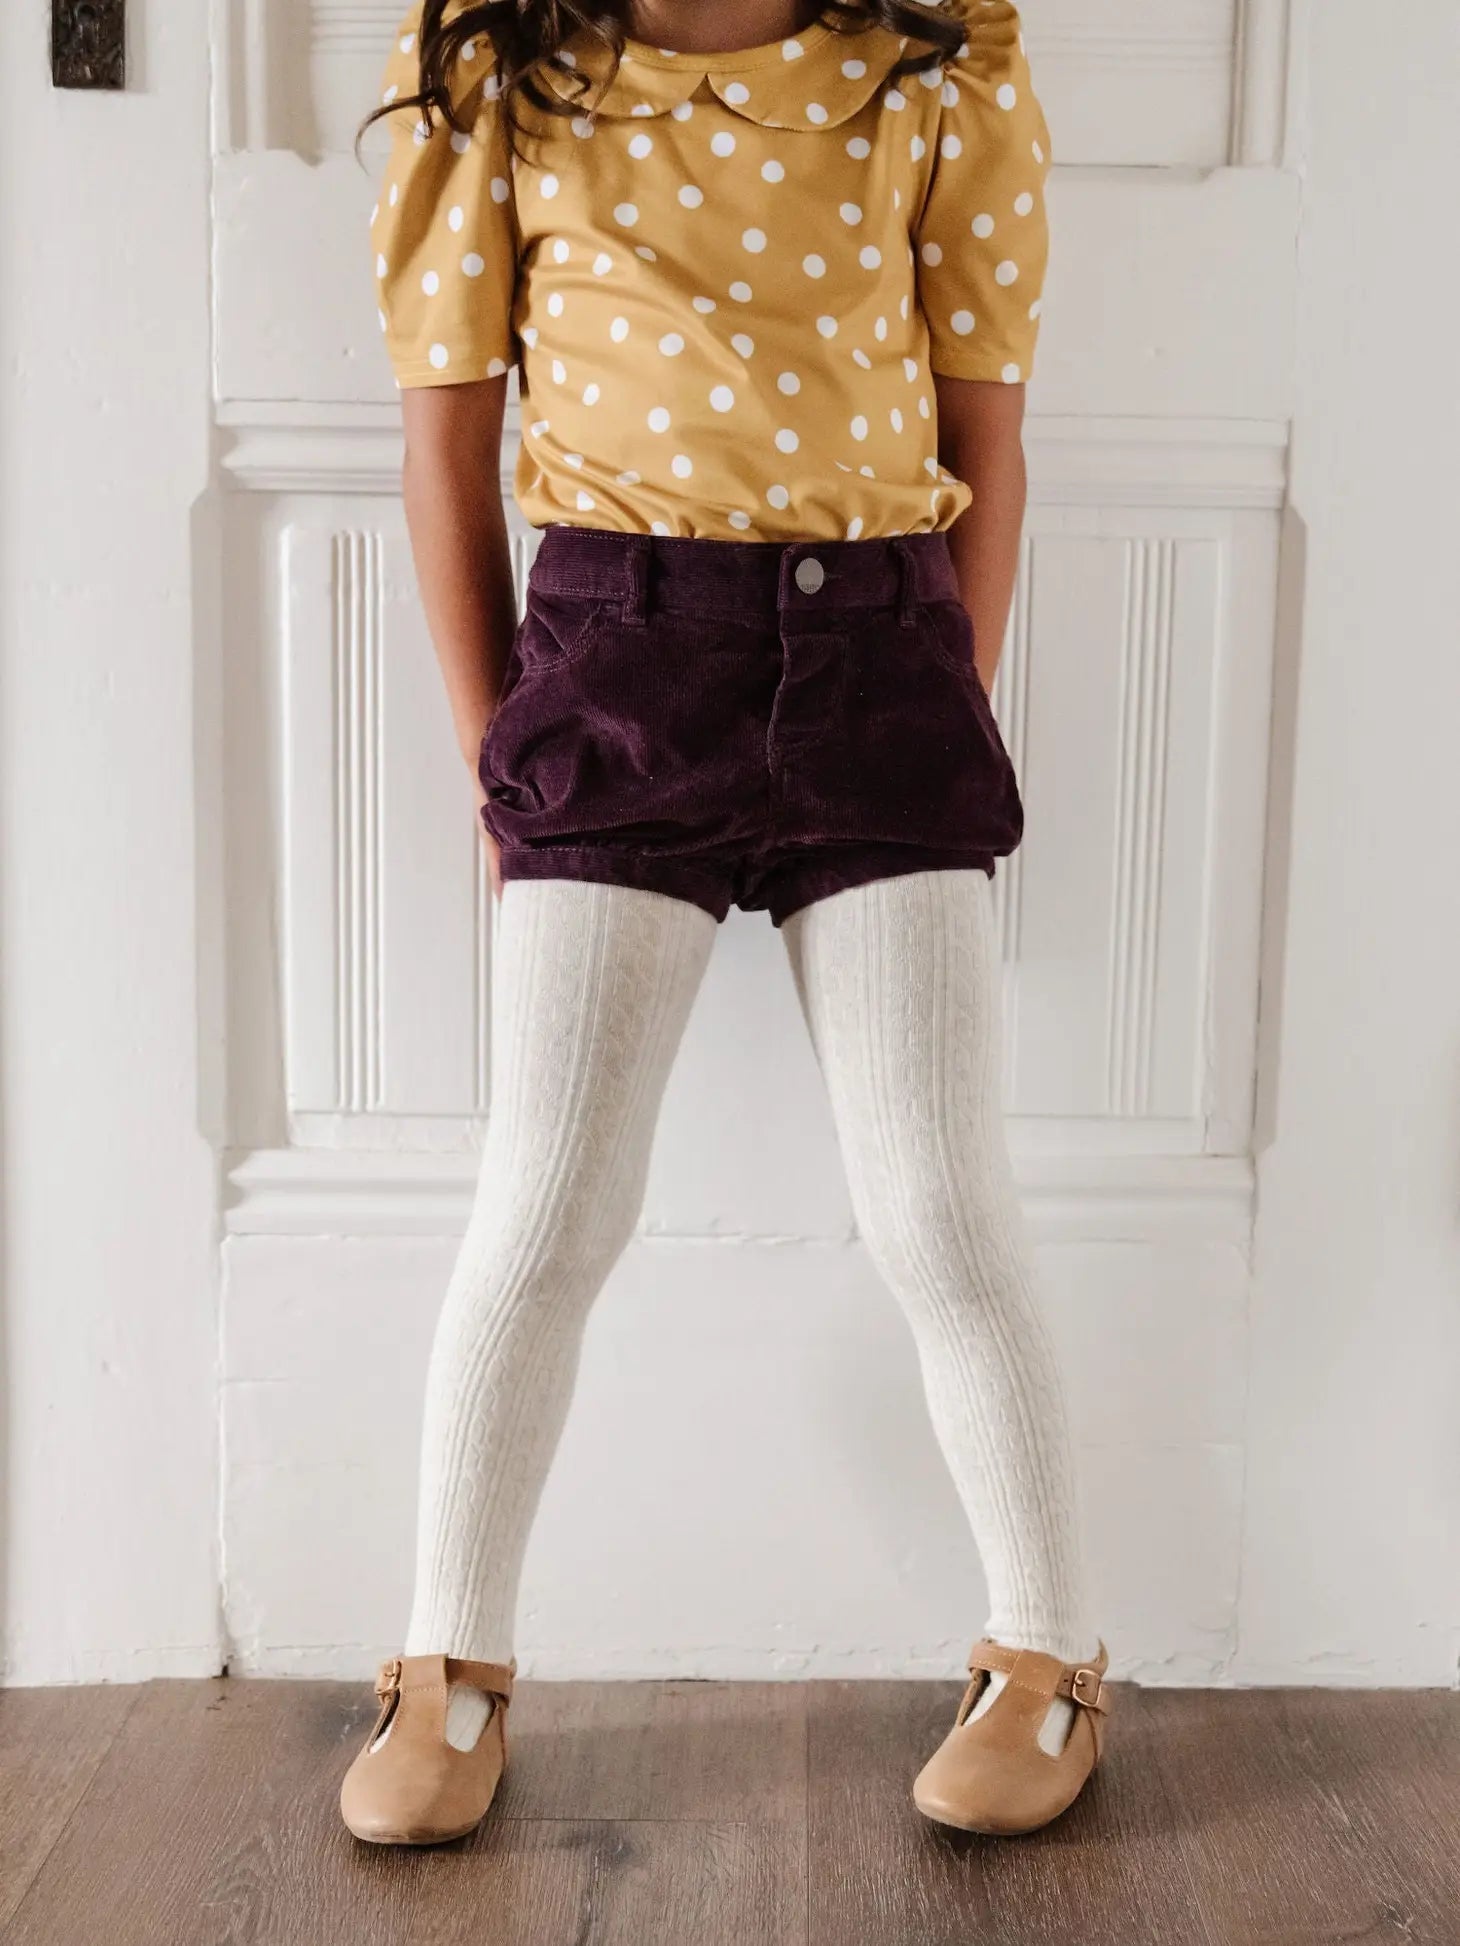 Heathered Ivory, Cable Knit Tights